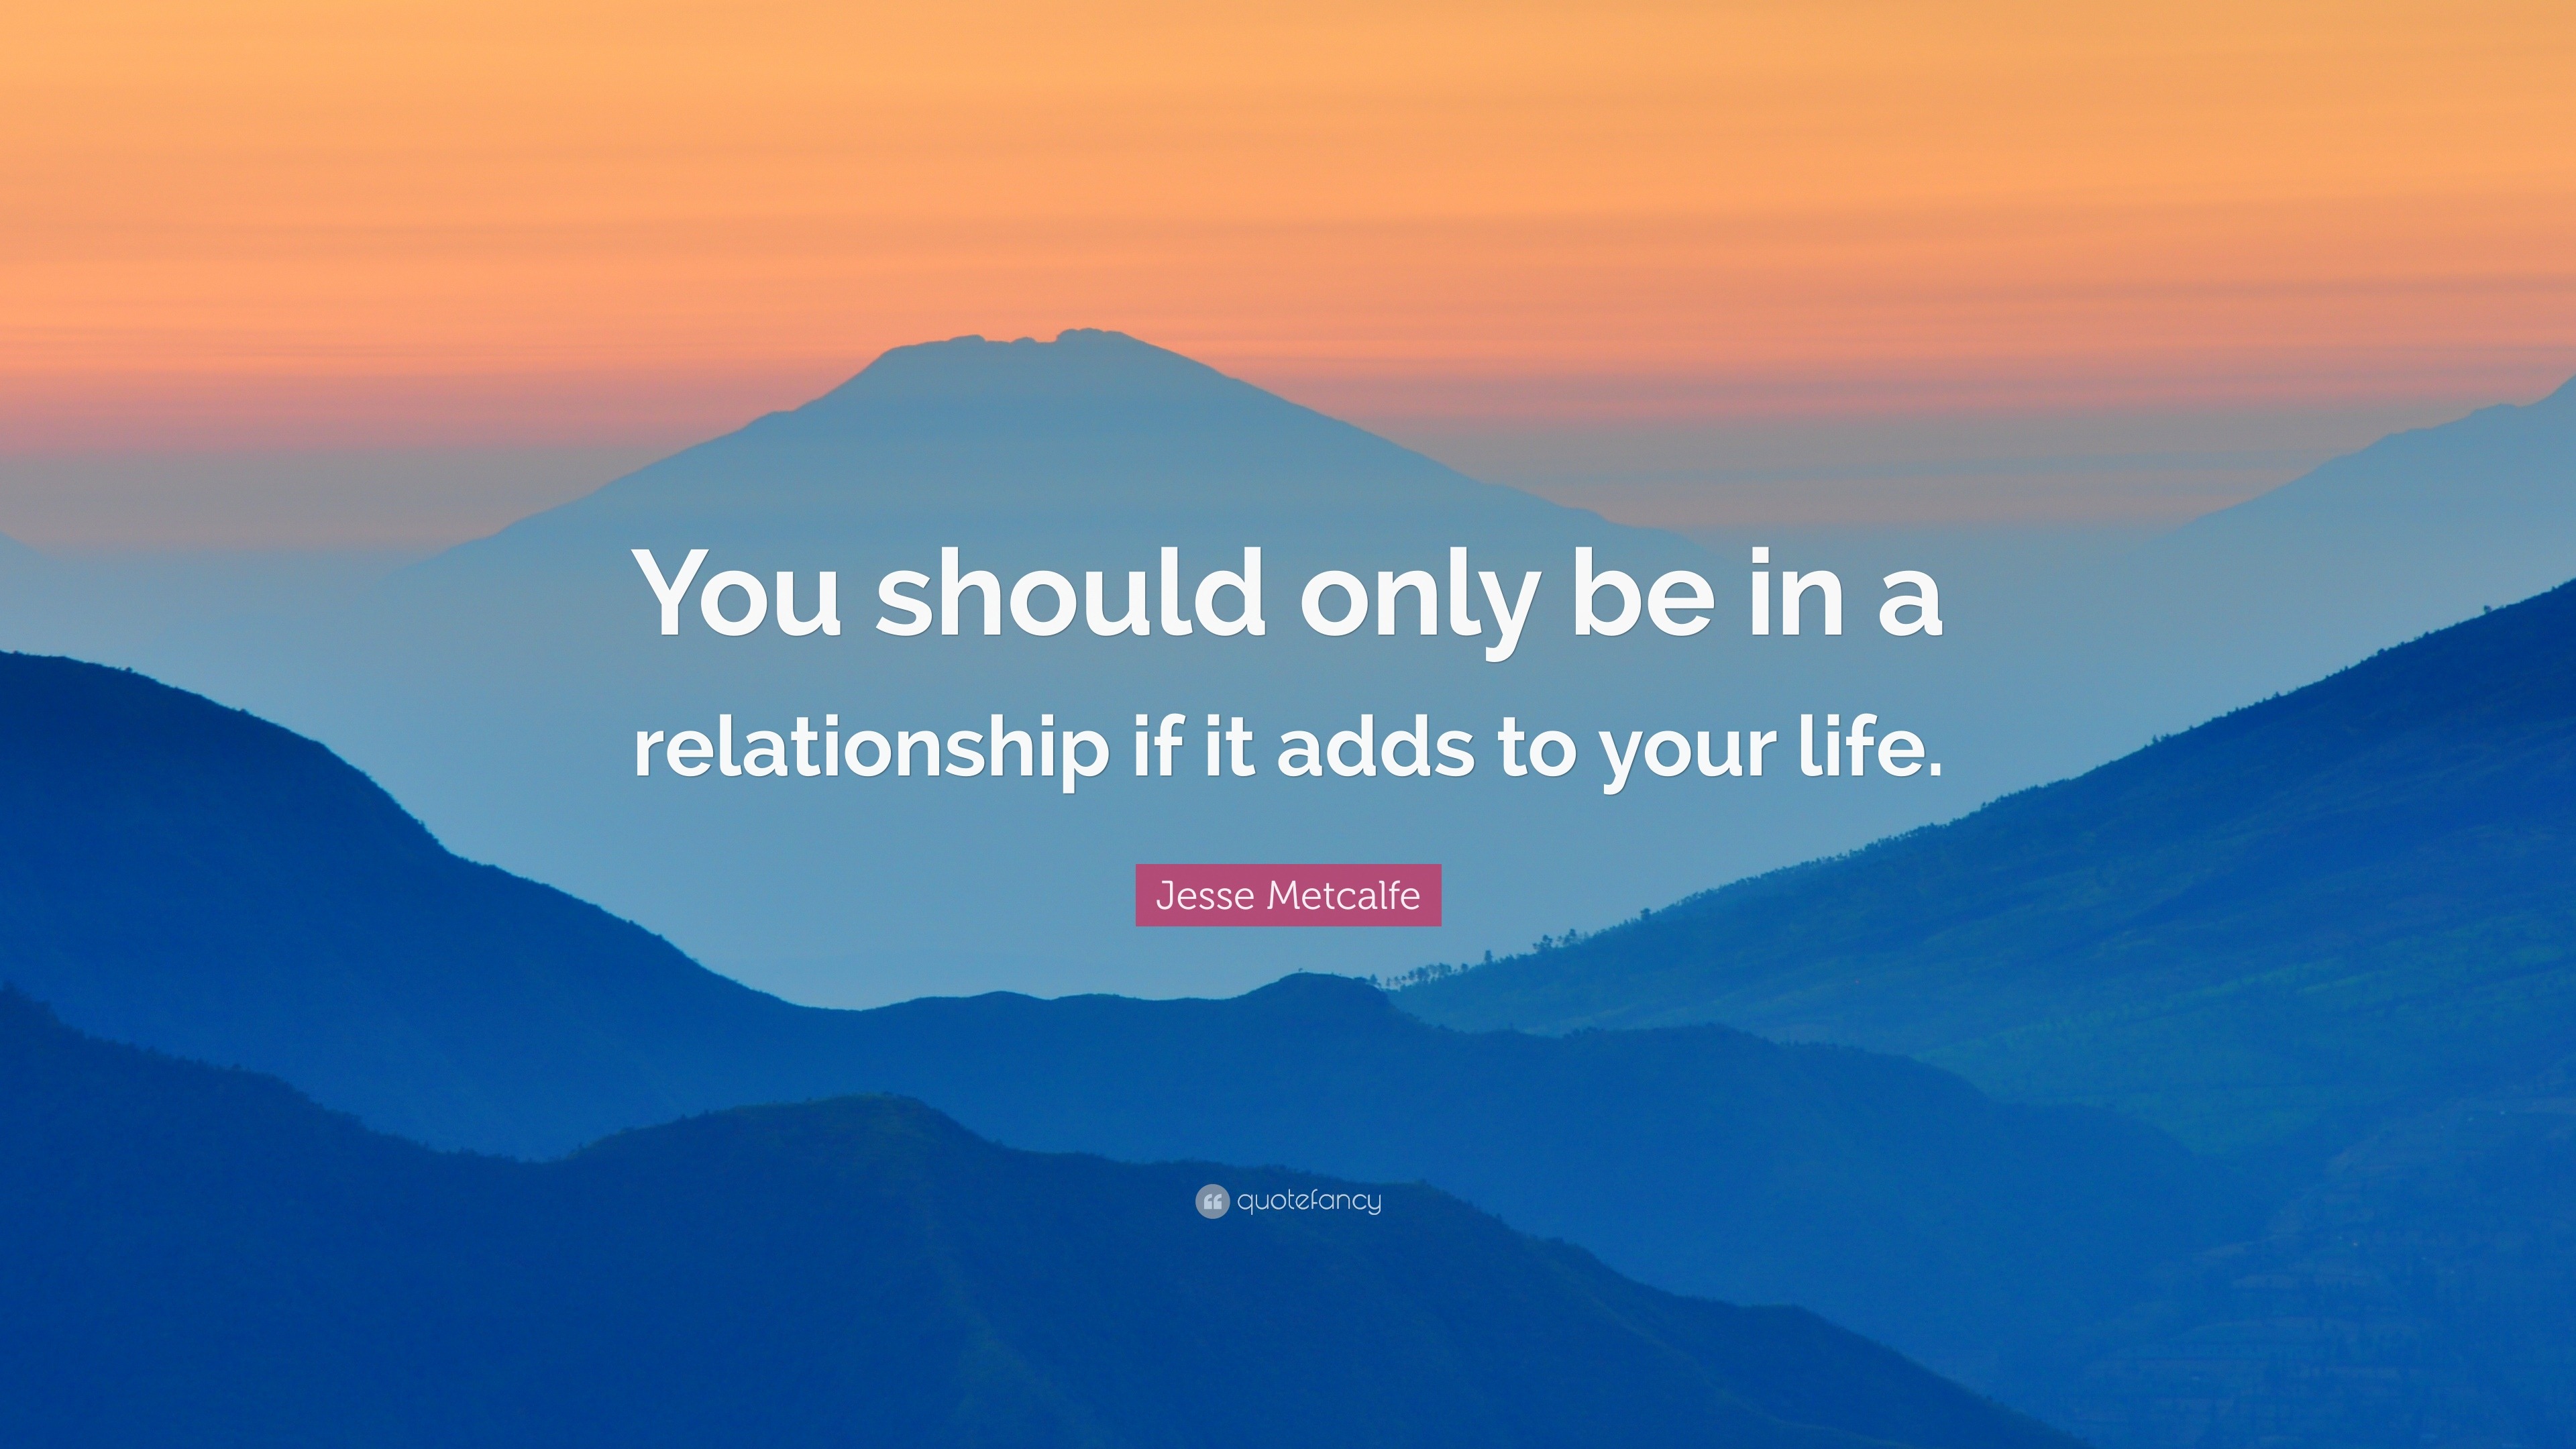 Jesse Metcalfe Quote “you Should Only Be In A Relationship If It Adds To Your Life” 